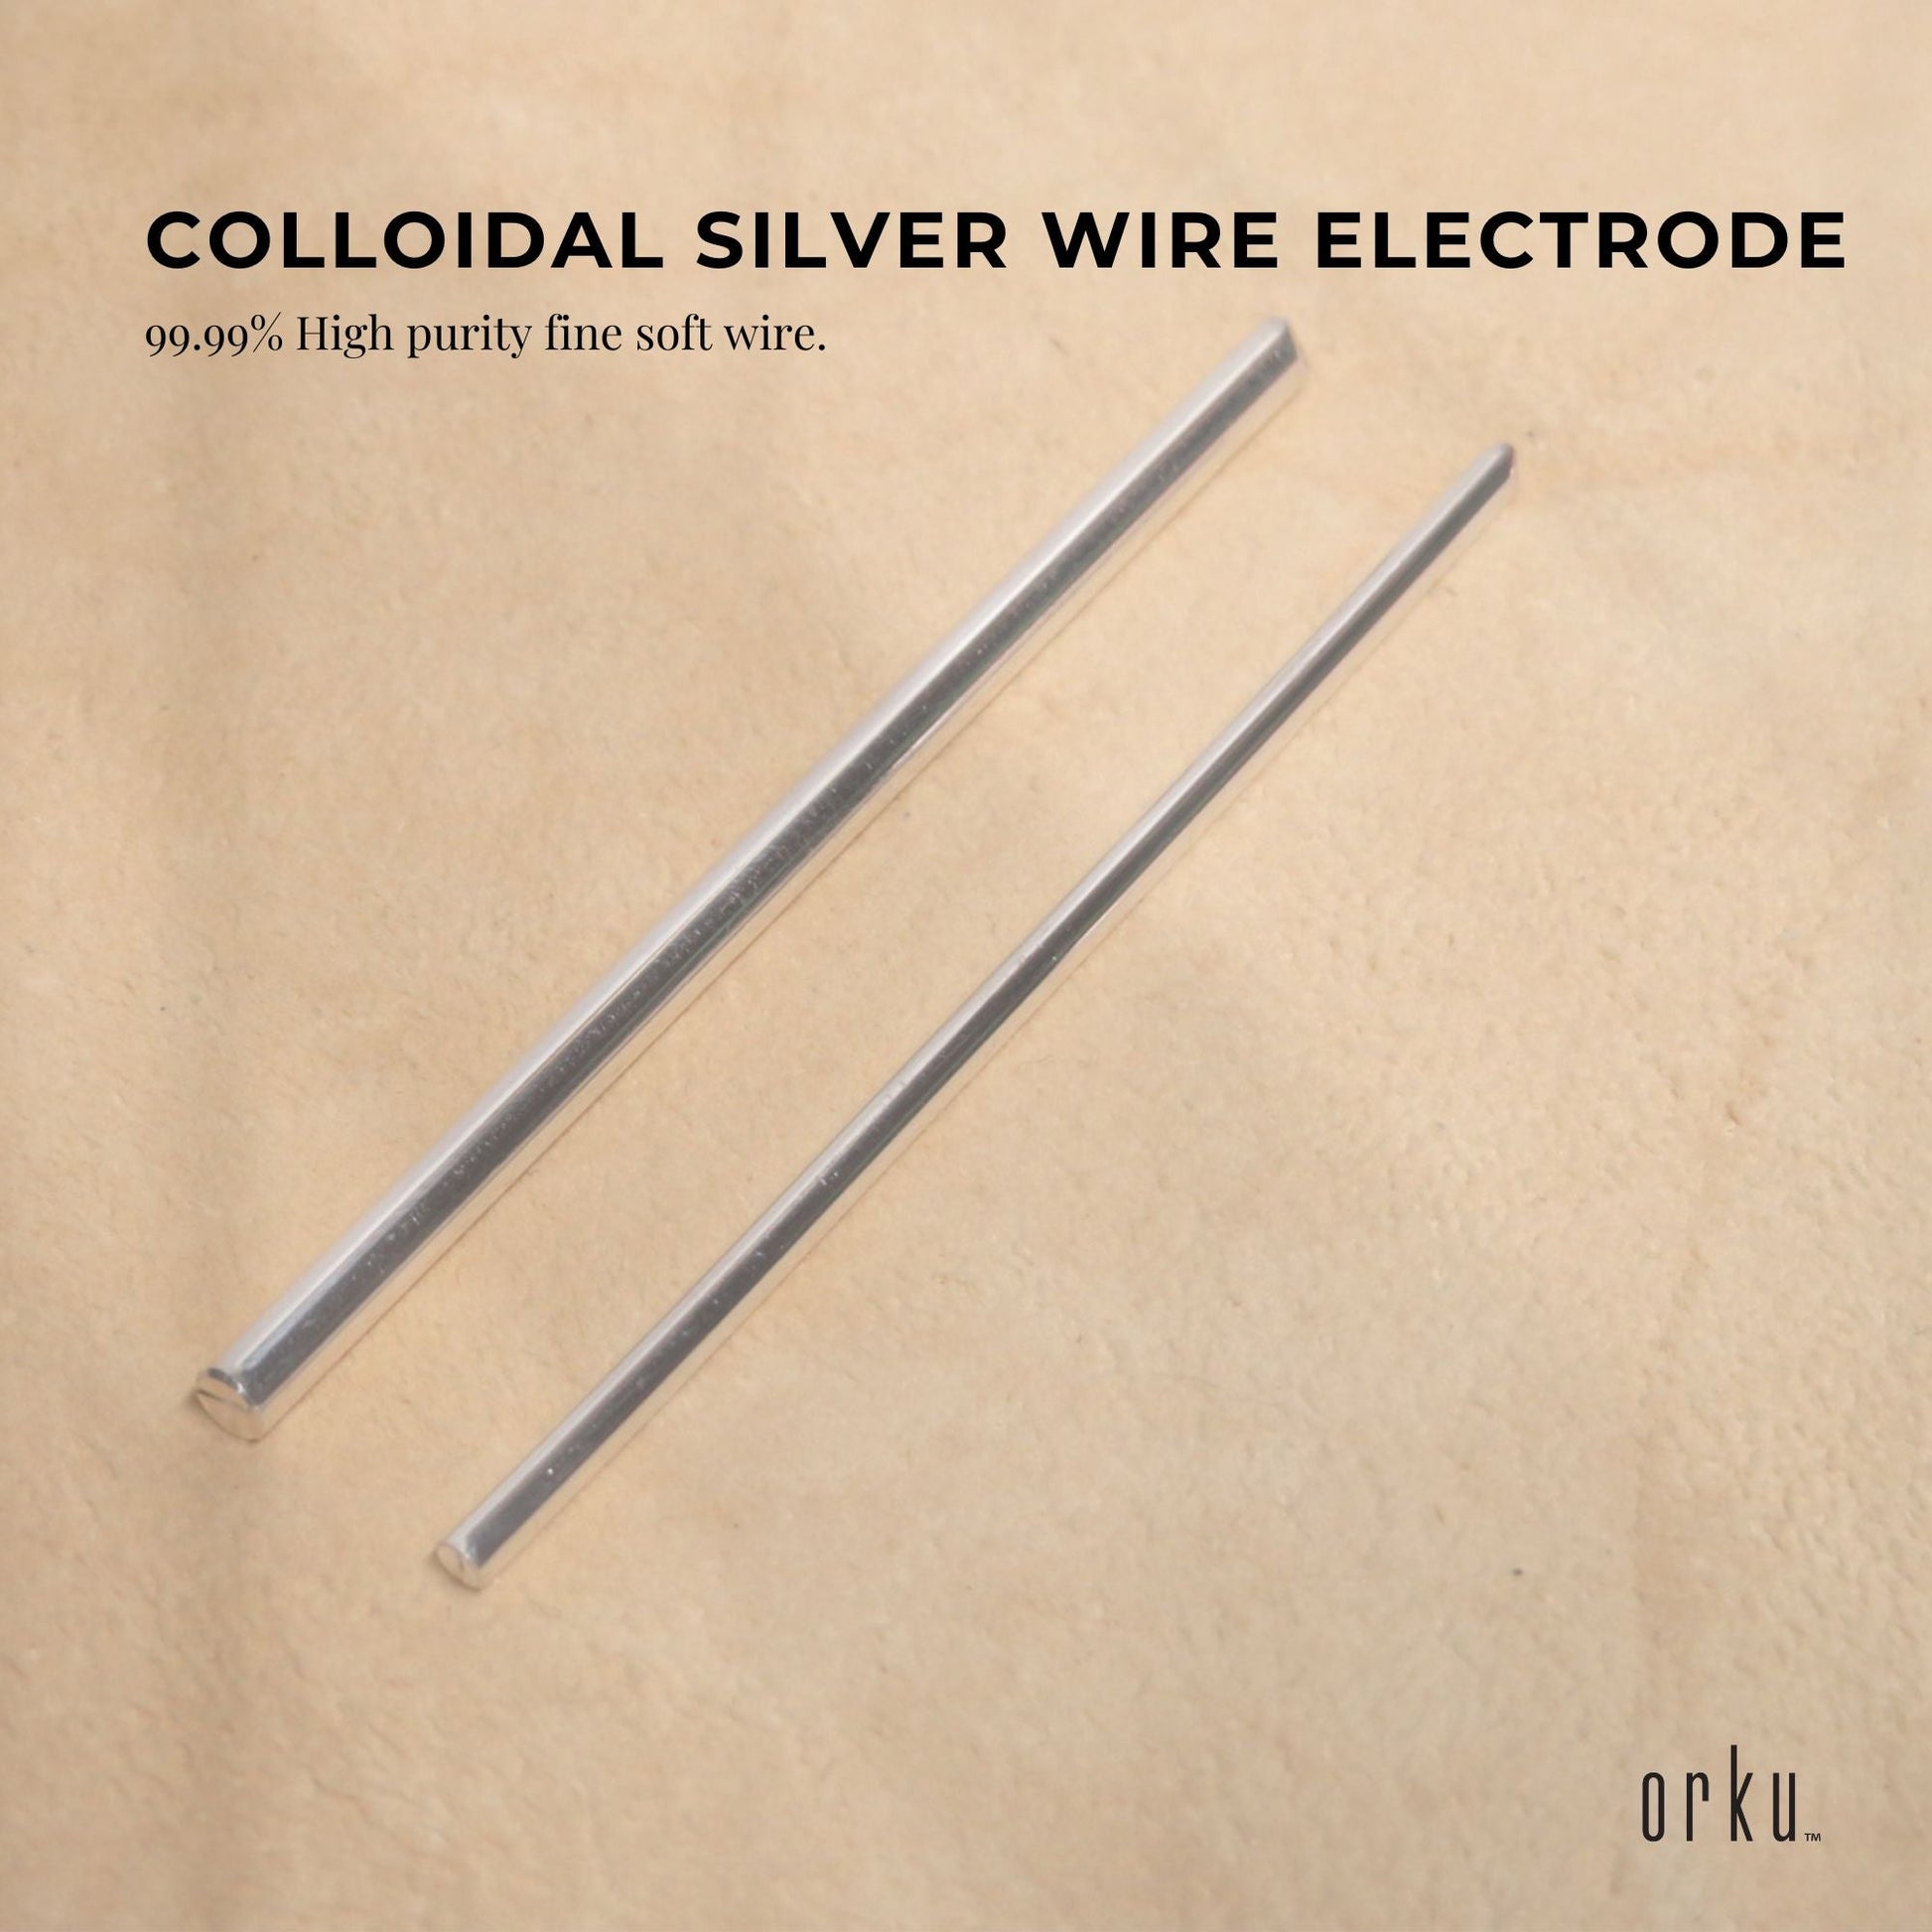 2x 8" Silver Rods 12 Gauge 99.99% High Purity Fine Soft Wire Colloidal Electrode